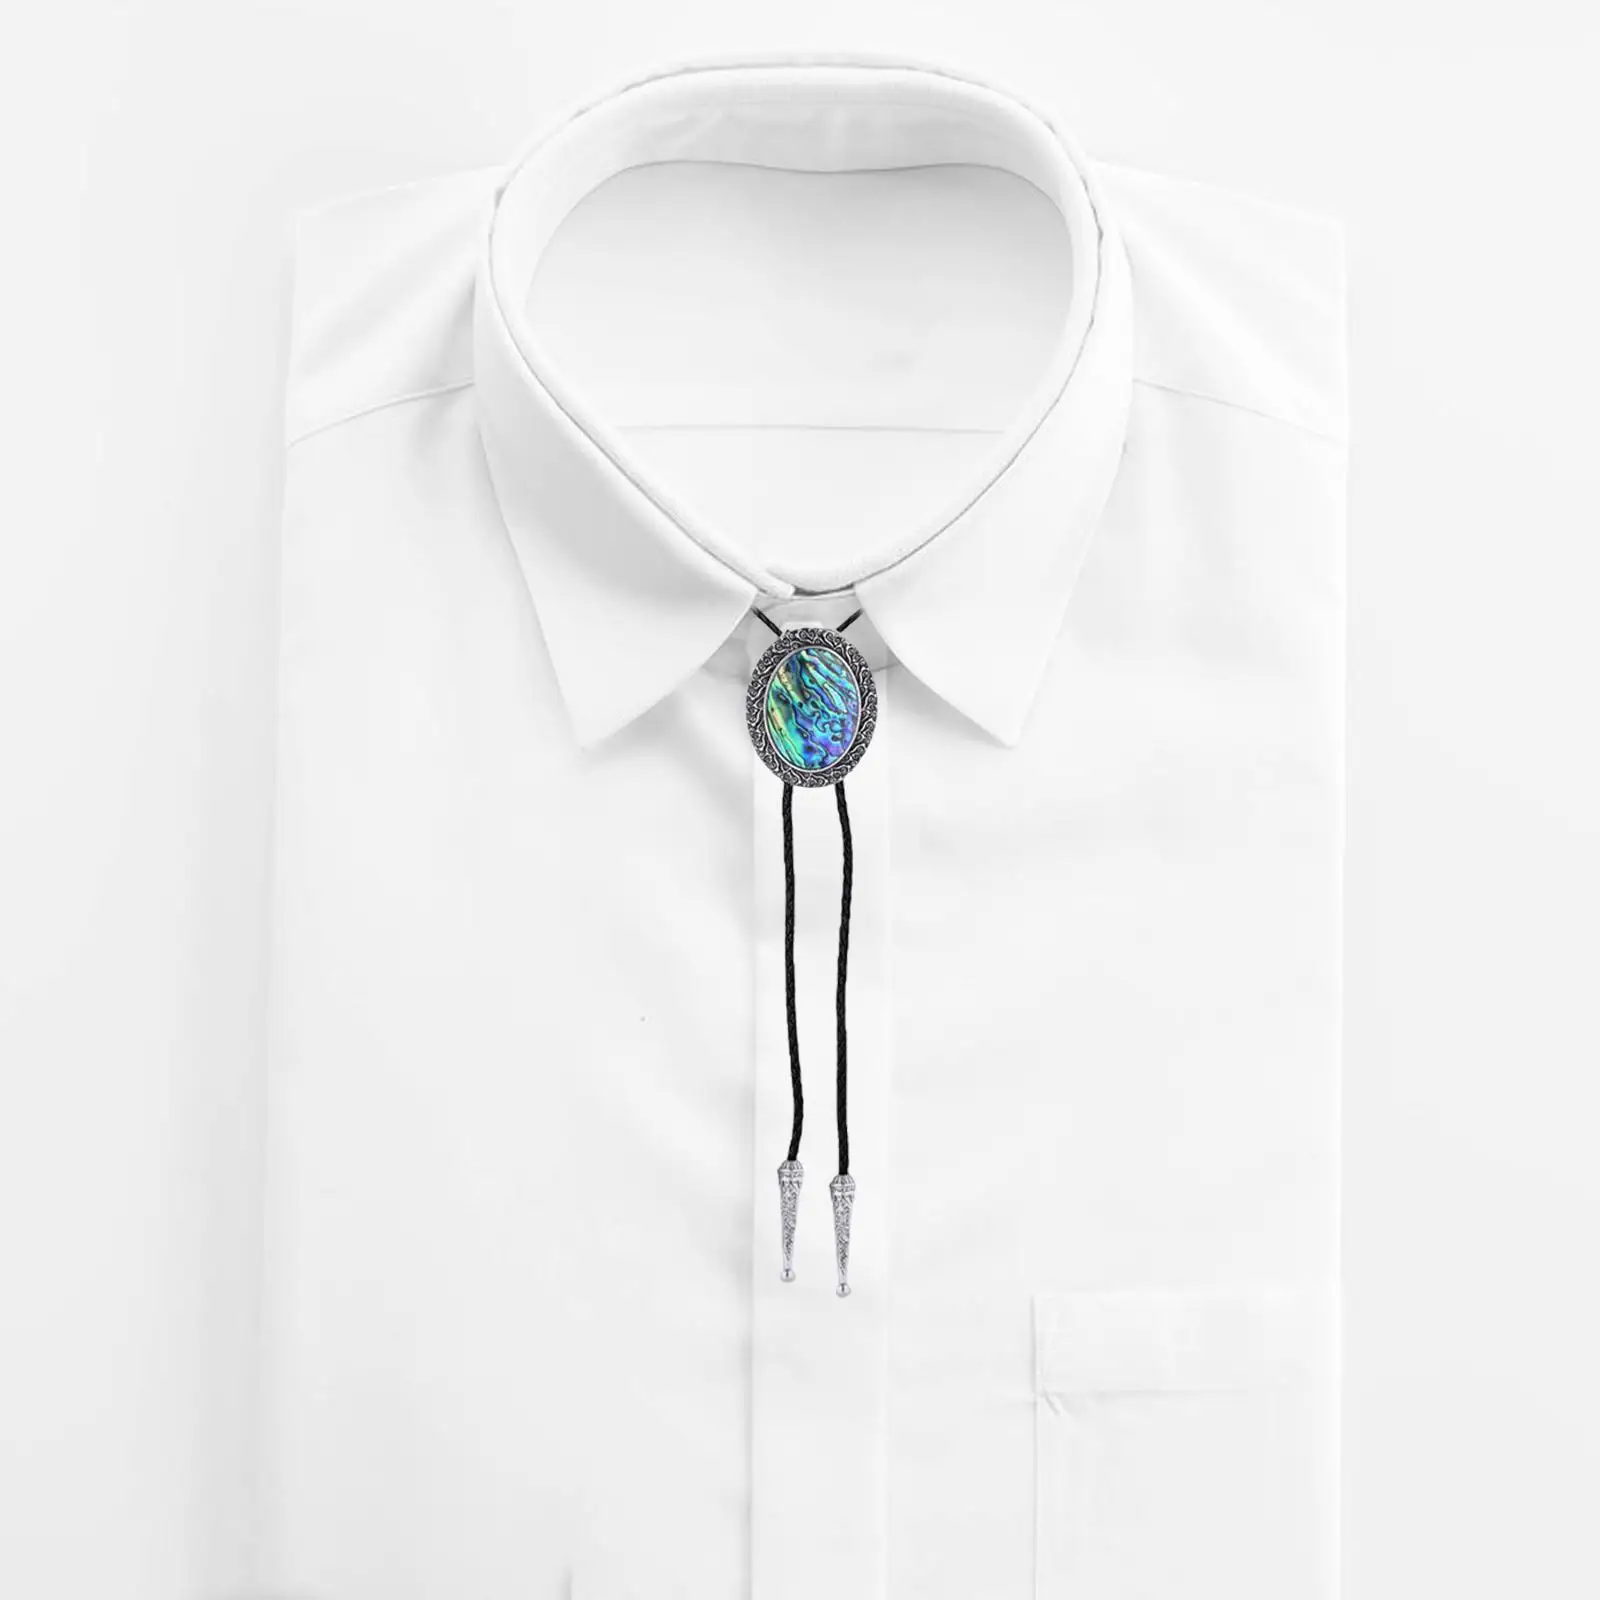 Stylish Western Bolo Tie Neck Ties Adjustable Rope Costume Accessories for Men Gift